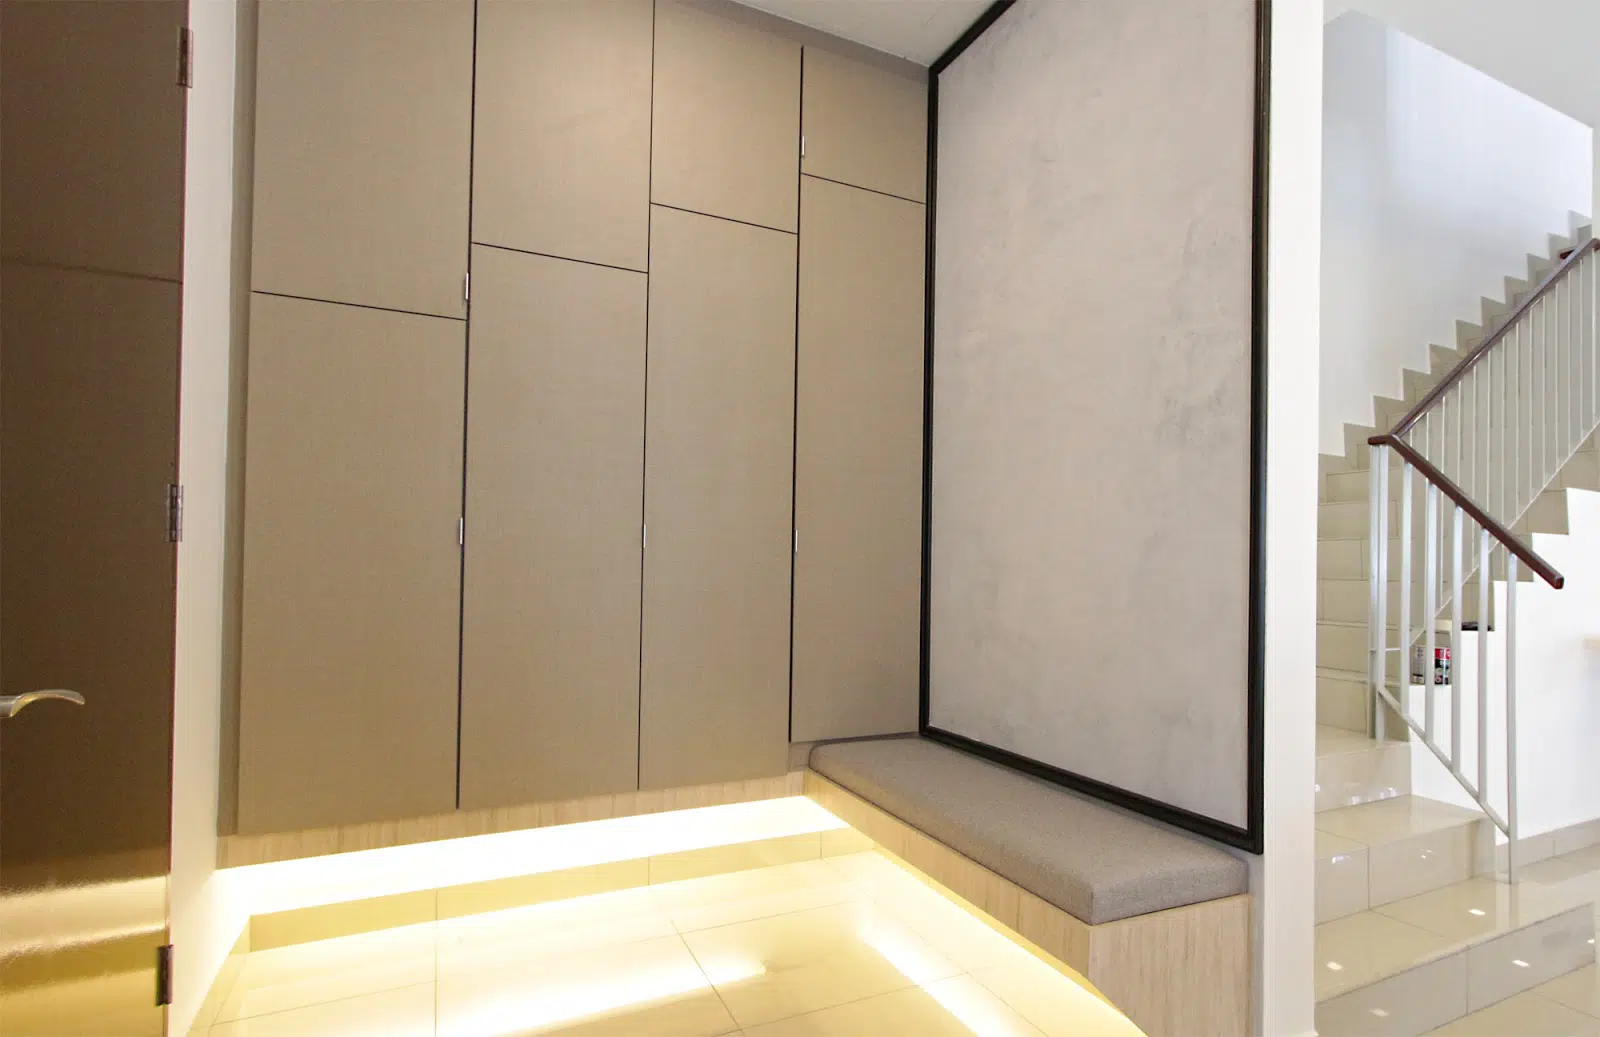 Top: Built-in wardrobe in one of the bedrooms. Above: Built-in cabinets and a seating area near the foyer area.